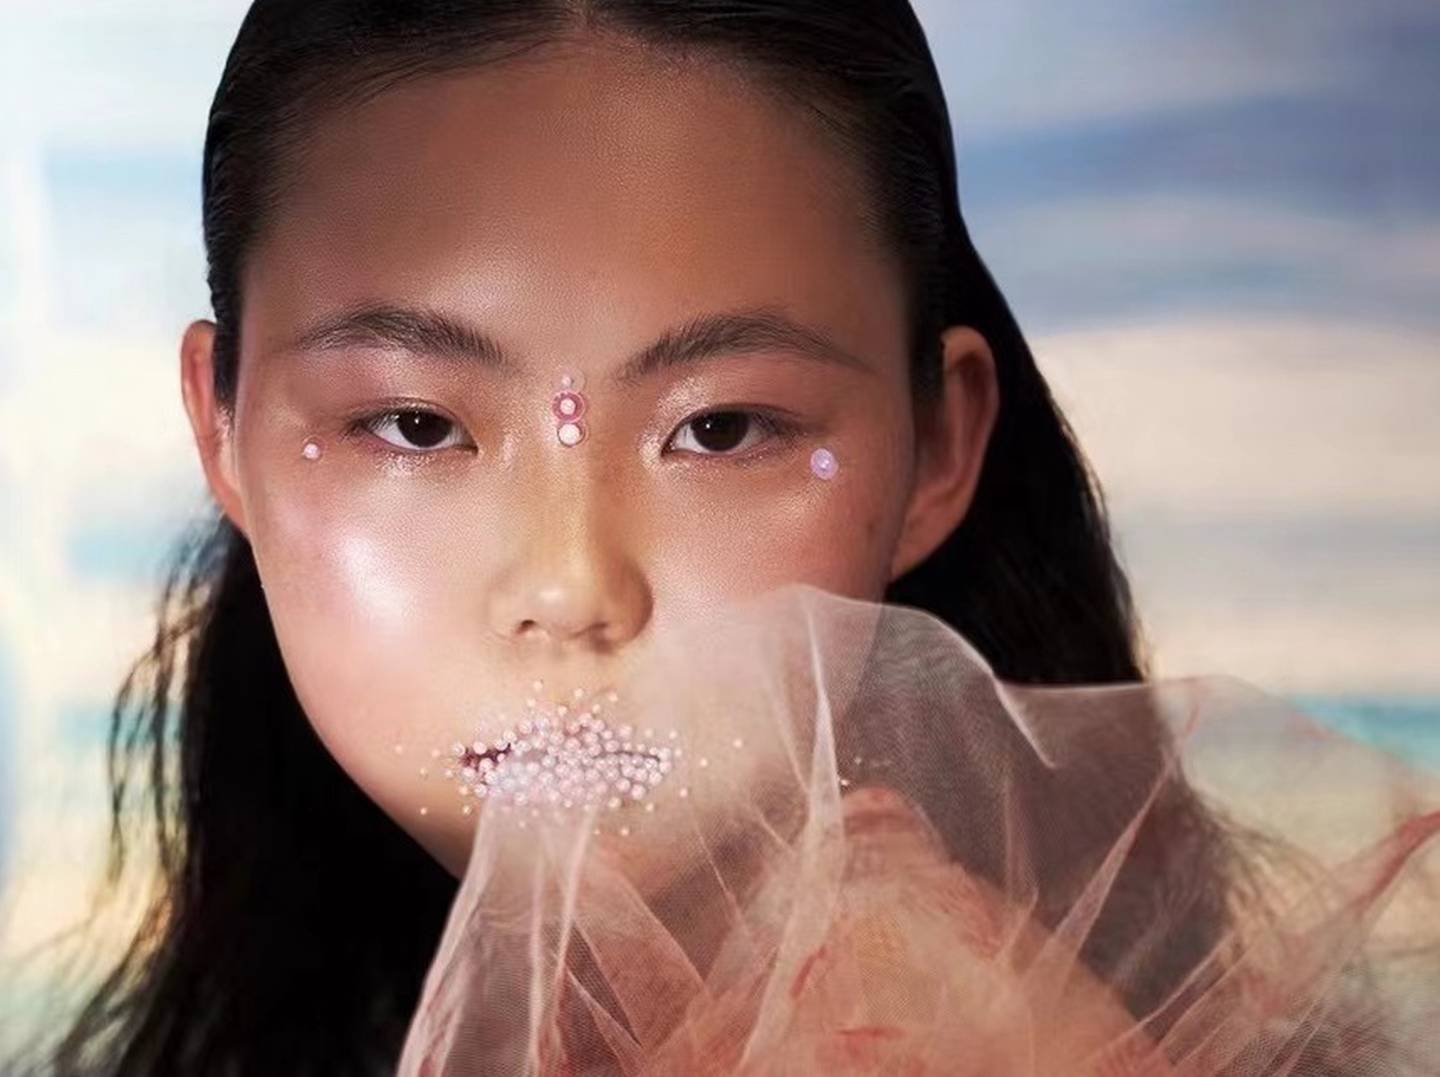 Clive Jing's work seeks to emphasise natural features and clean skin.